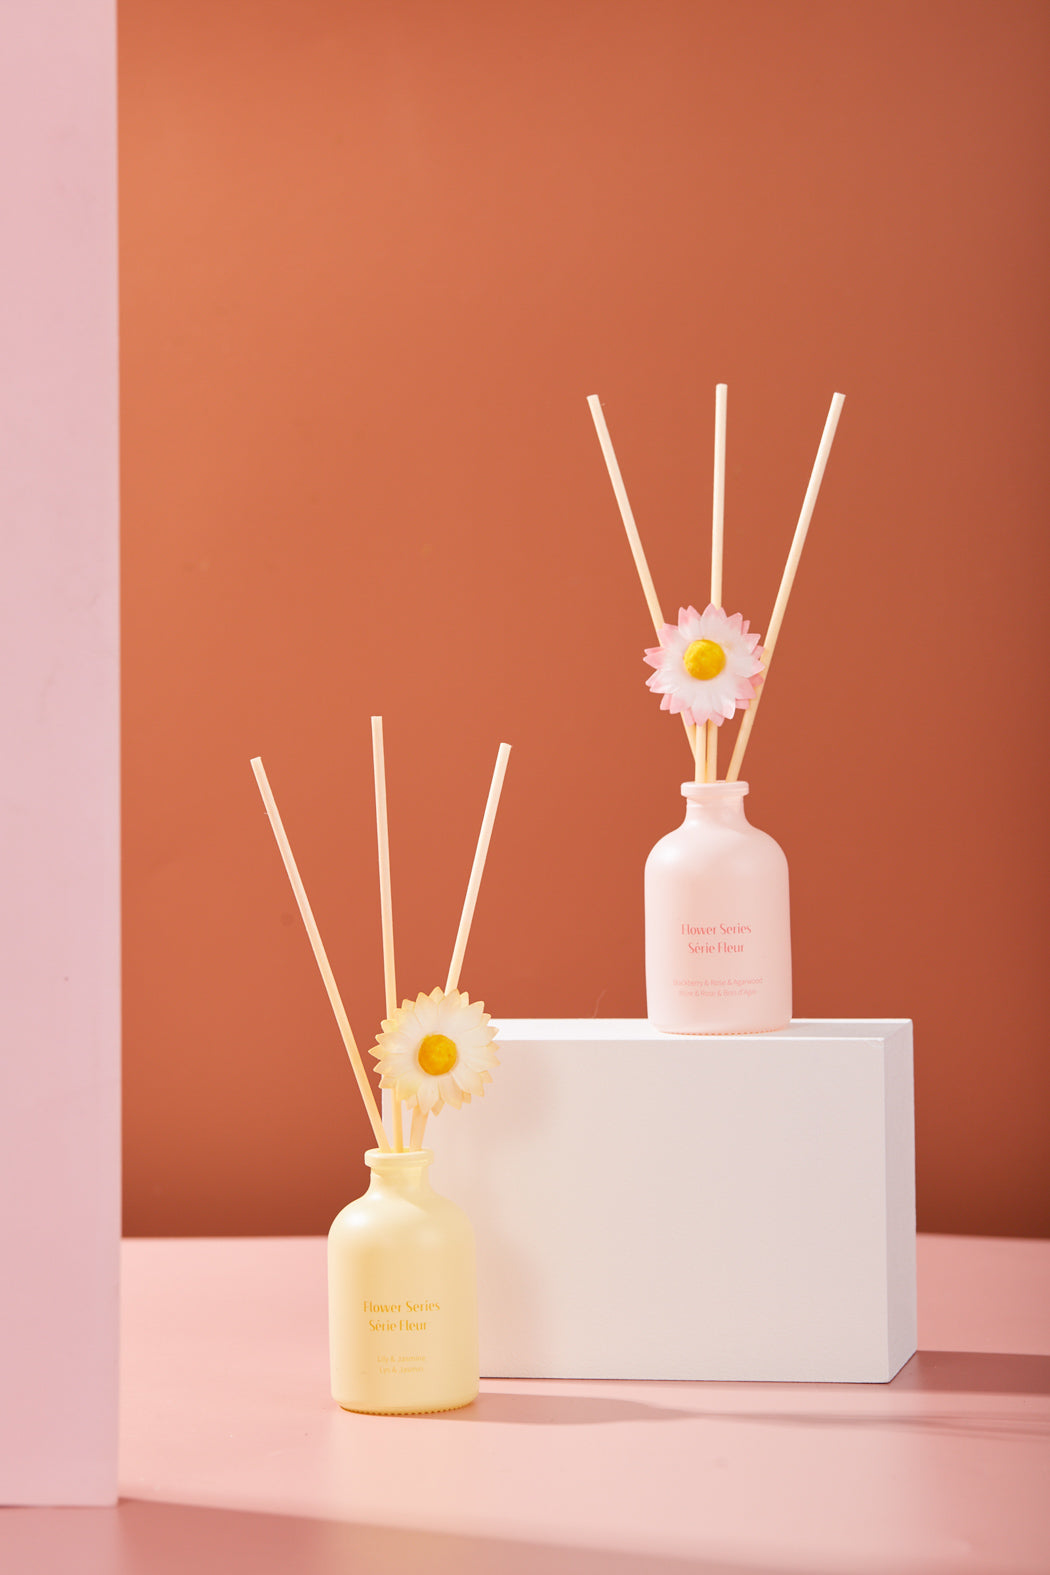 MINISO FLOWER SERIES-REED DIFFUSER ( BLACKBERRY & ROSE & AGARWOOD ) 2011534910107 SCENT DIFFUSER